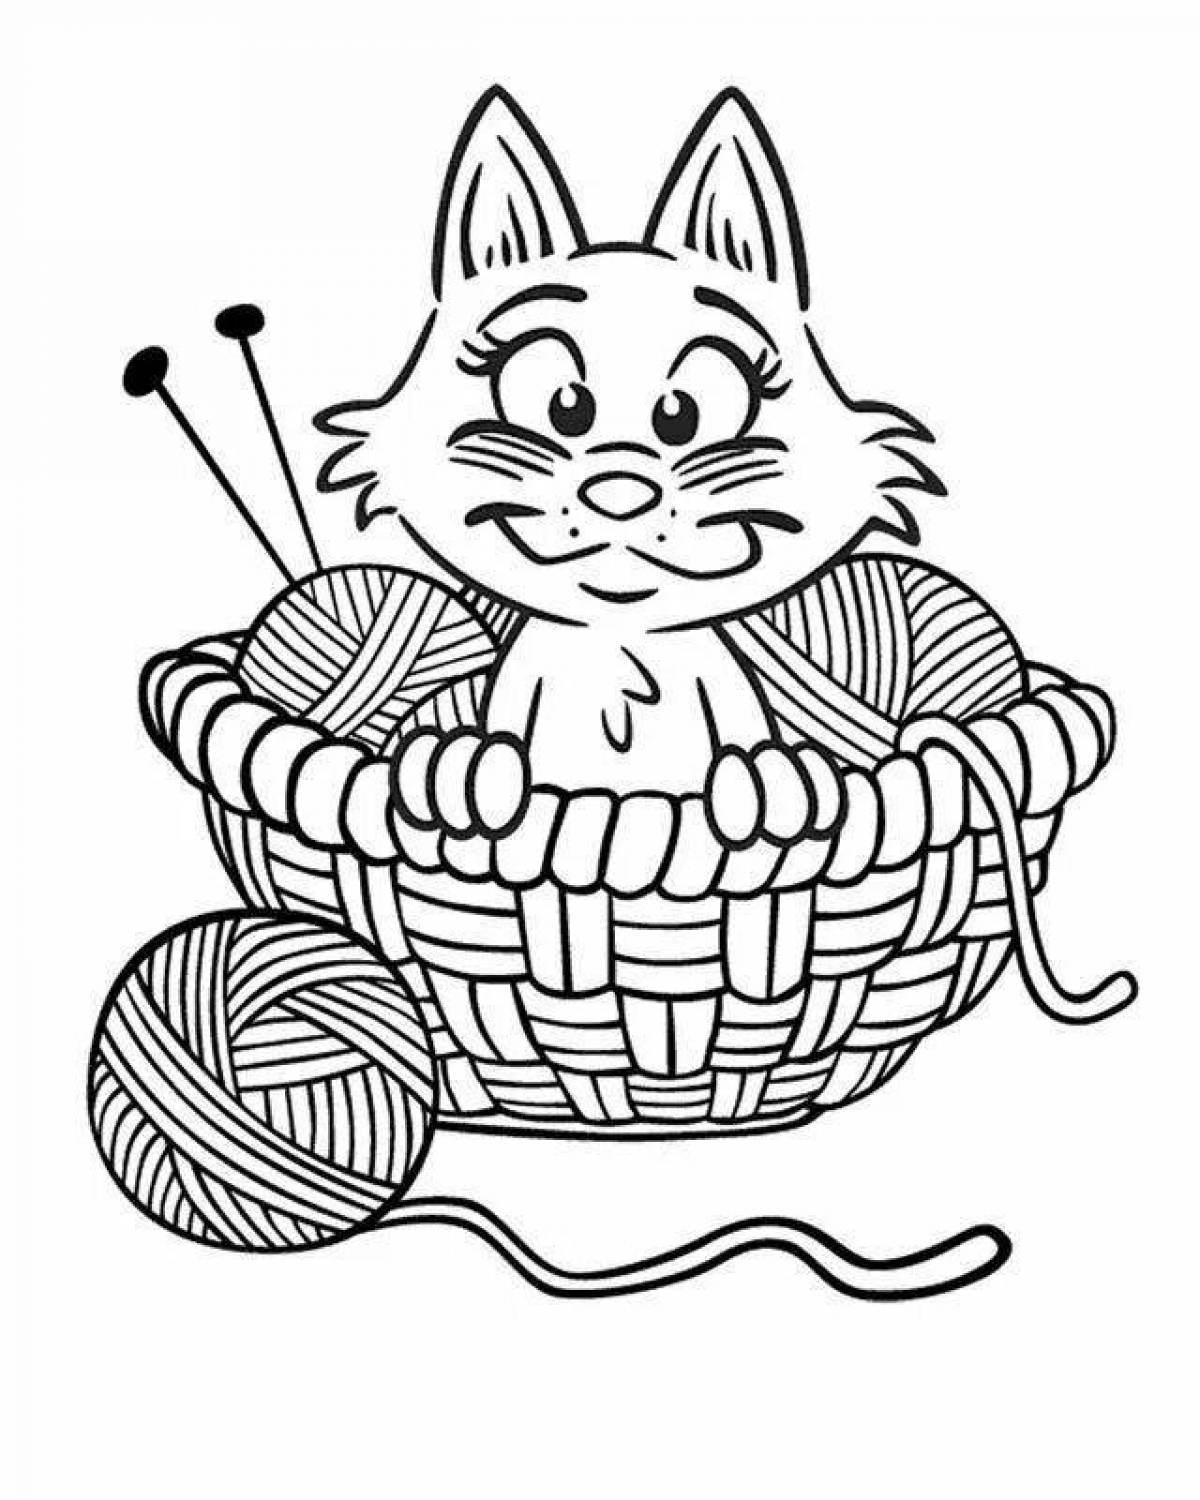 Coloring page witty cat with a ball